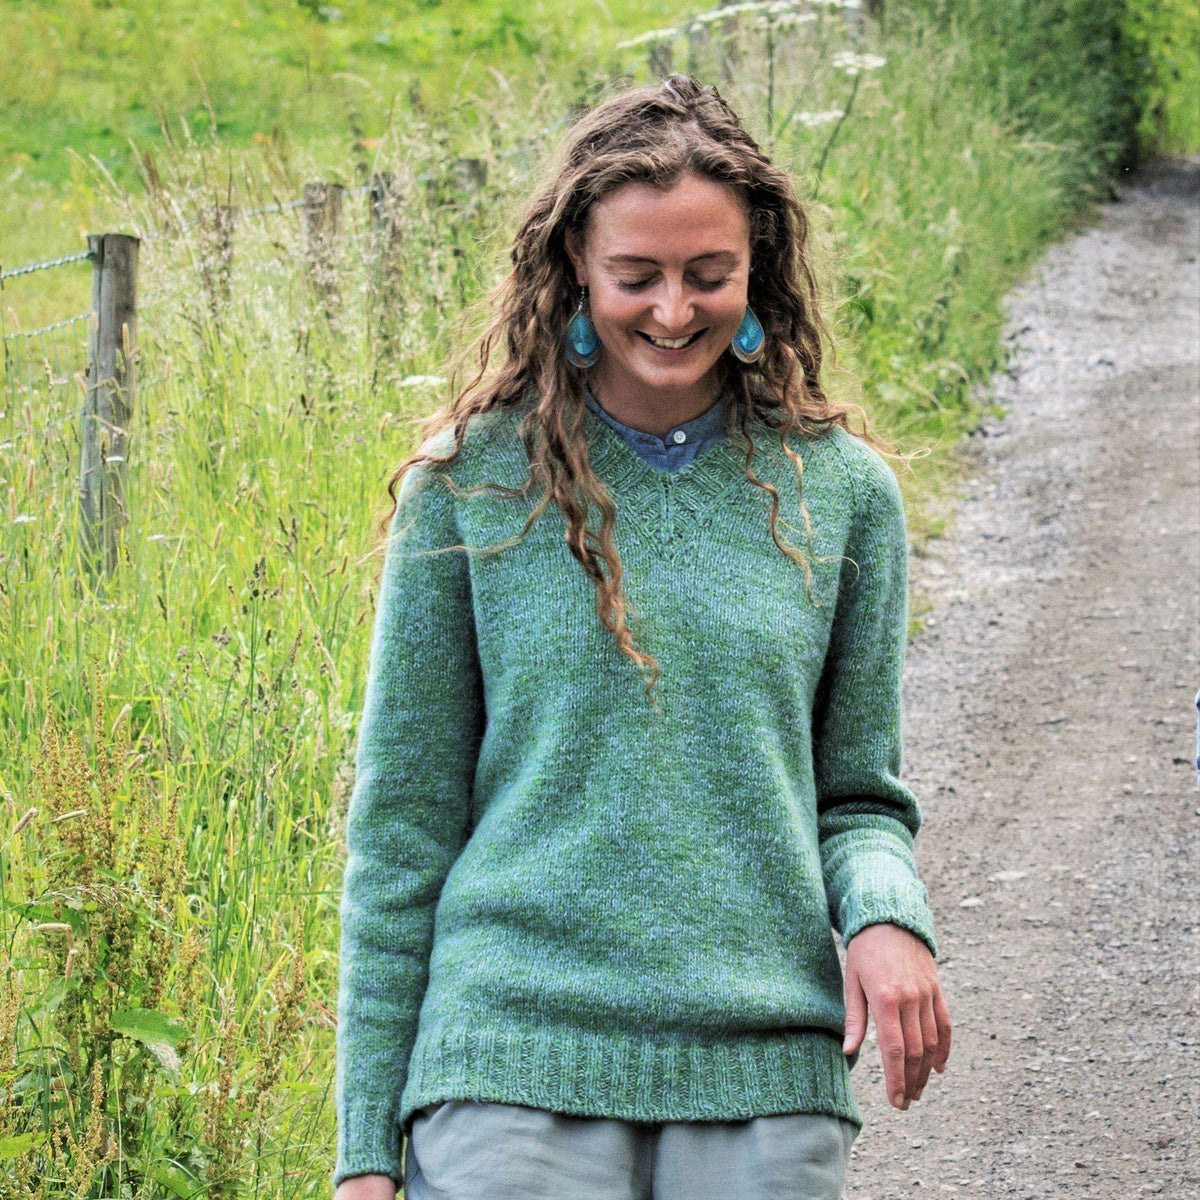 The Fibre Co. One Sweater V-Neck -  - Downloadable Knitting Pattern